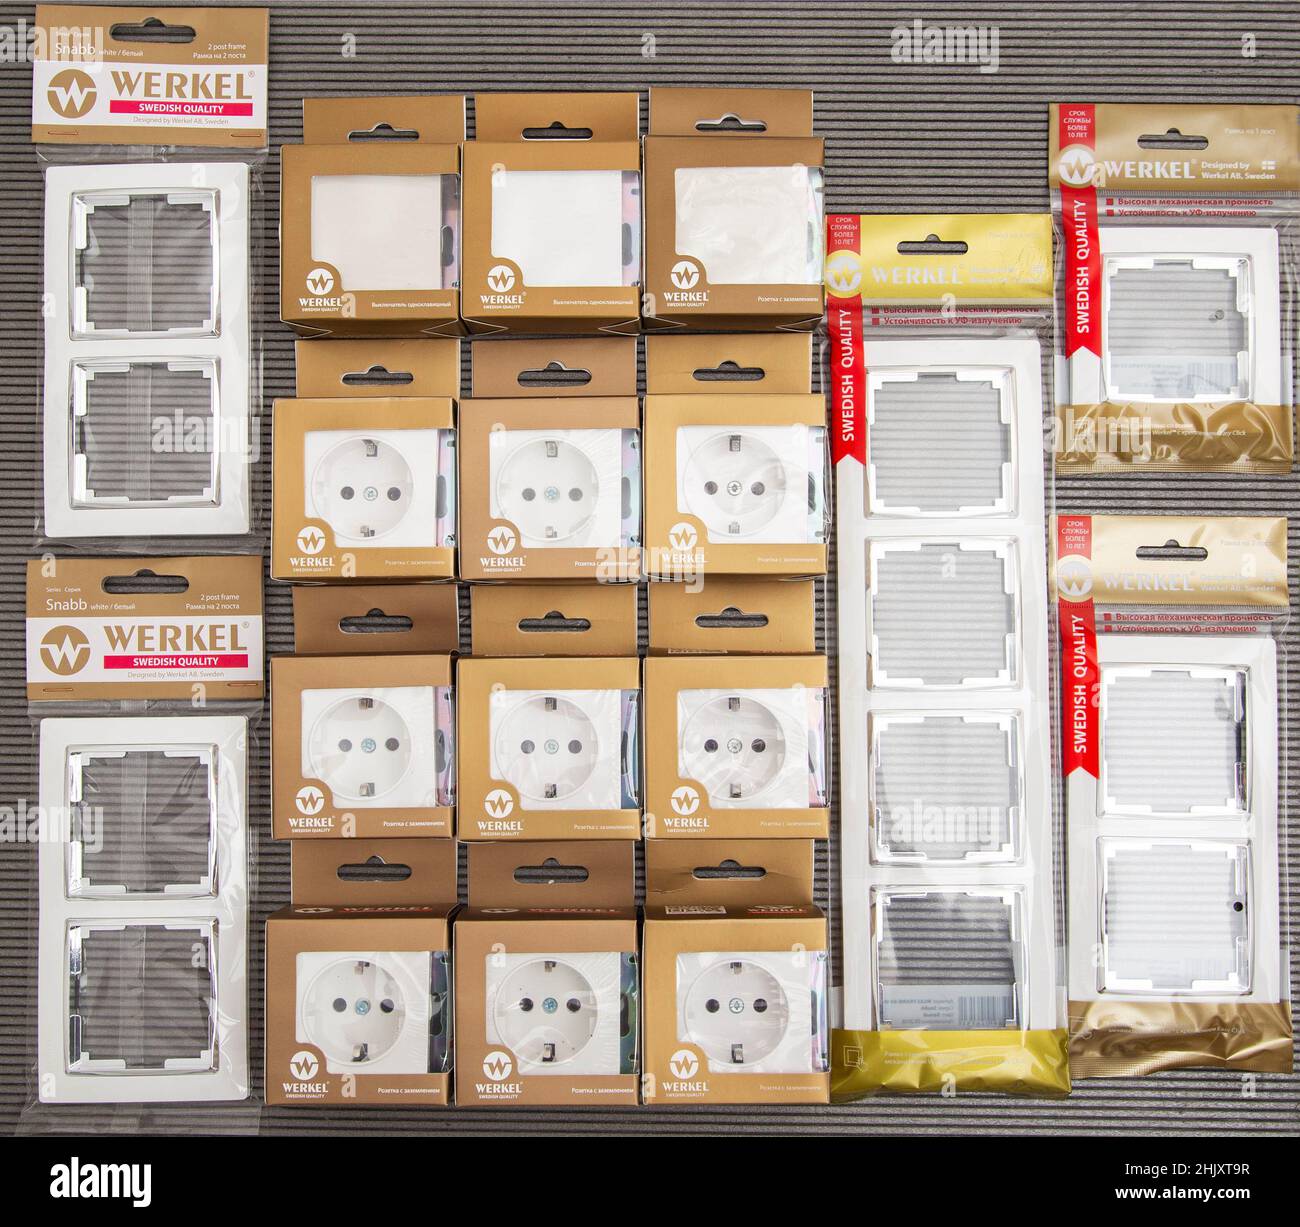 BOBRUISK, BELARUS 22.01.22: Werkel brand electrical kit on a gray background. Set of sockets, switches and frames, close-up Stock Photo